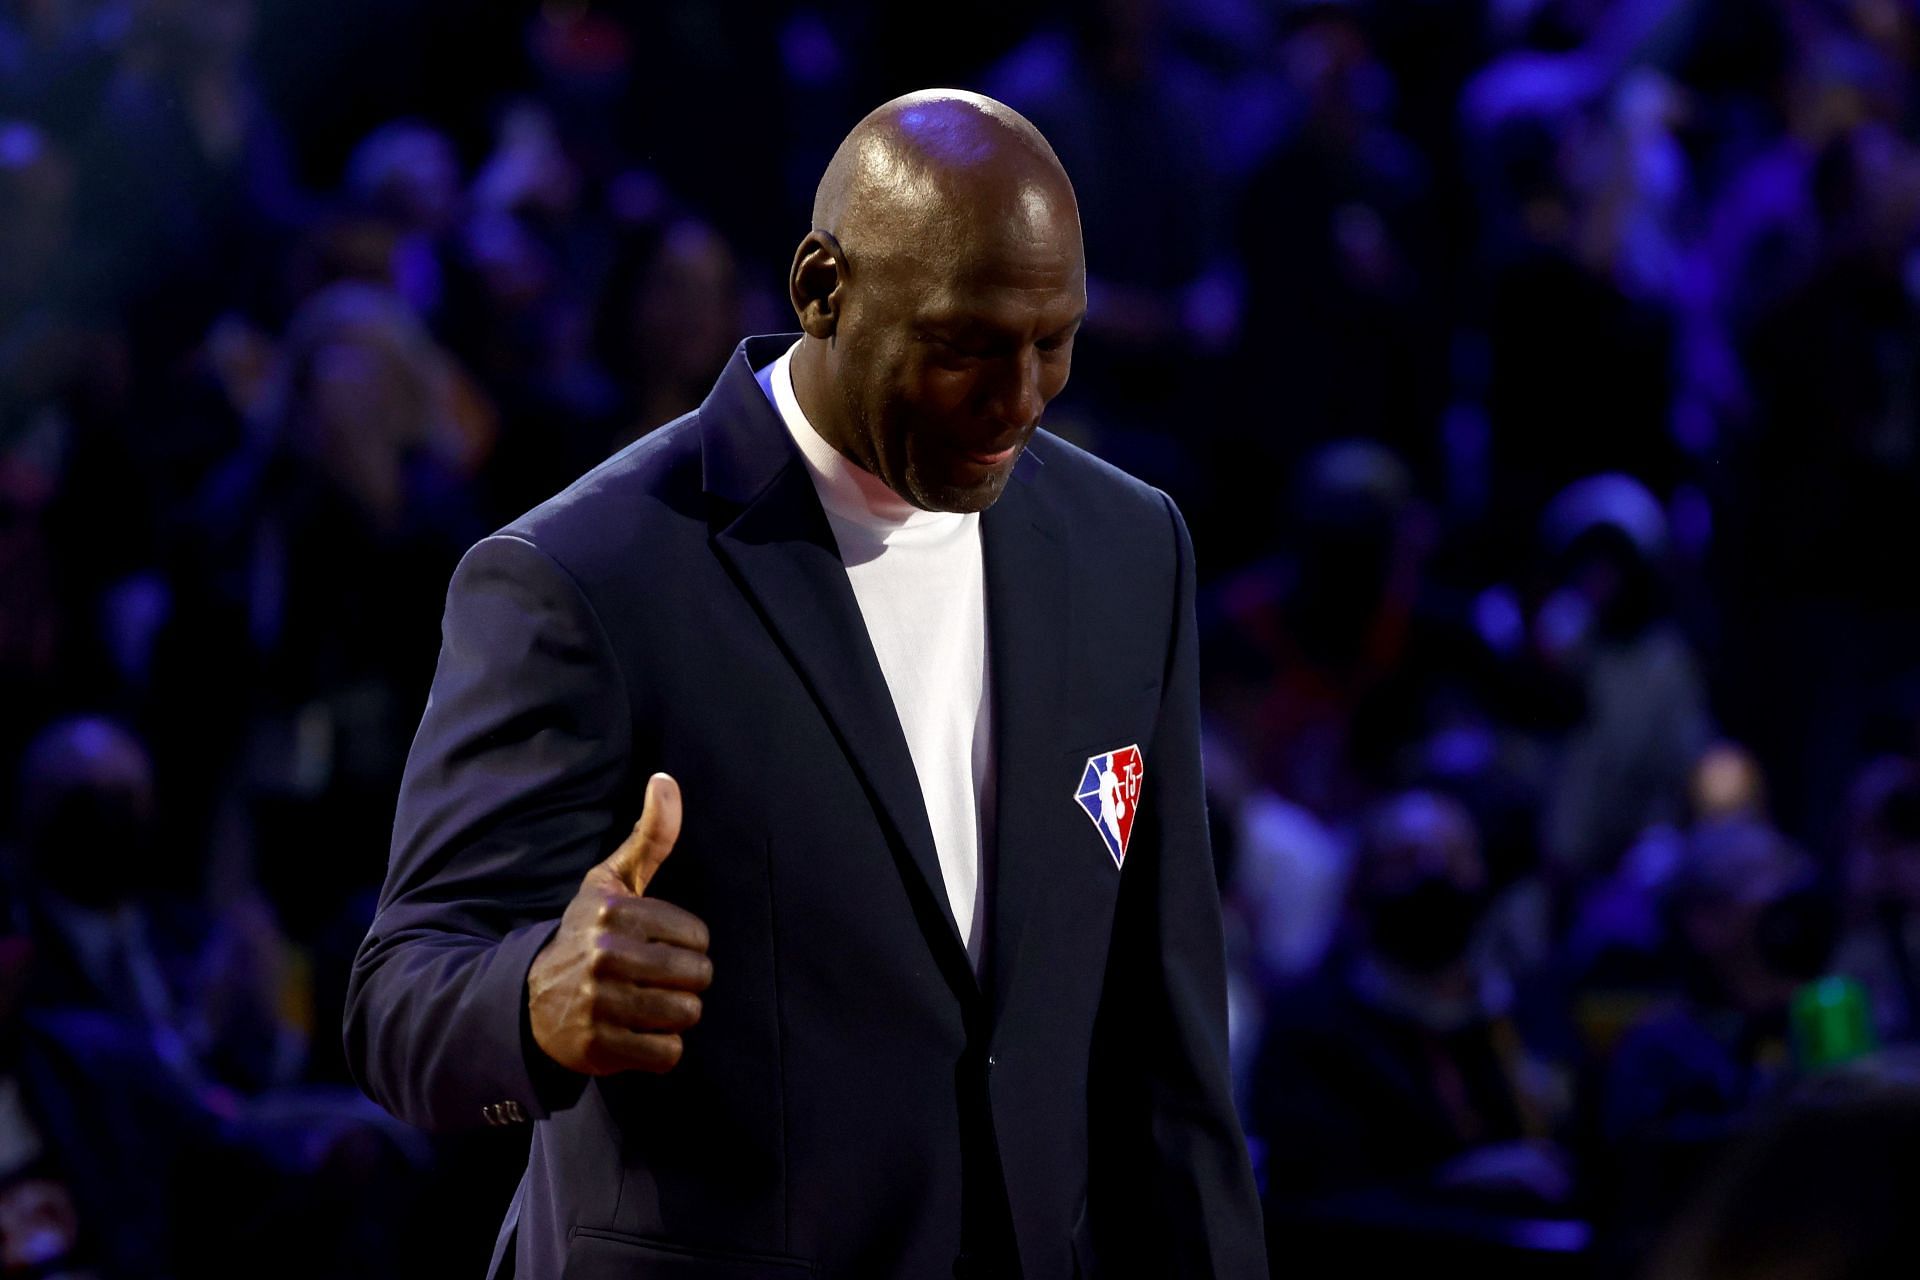 Stacey King Tells Awkward Story About Rubbing A Half-Naked Michael Jordan  For Good Luck While Bulls Teammates - BroBible